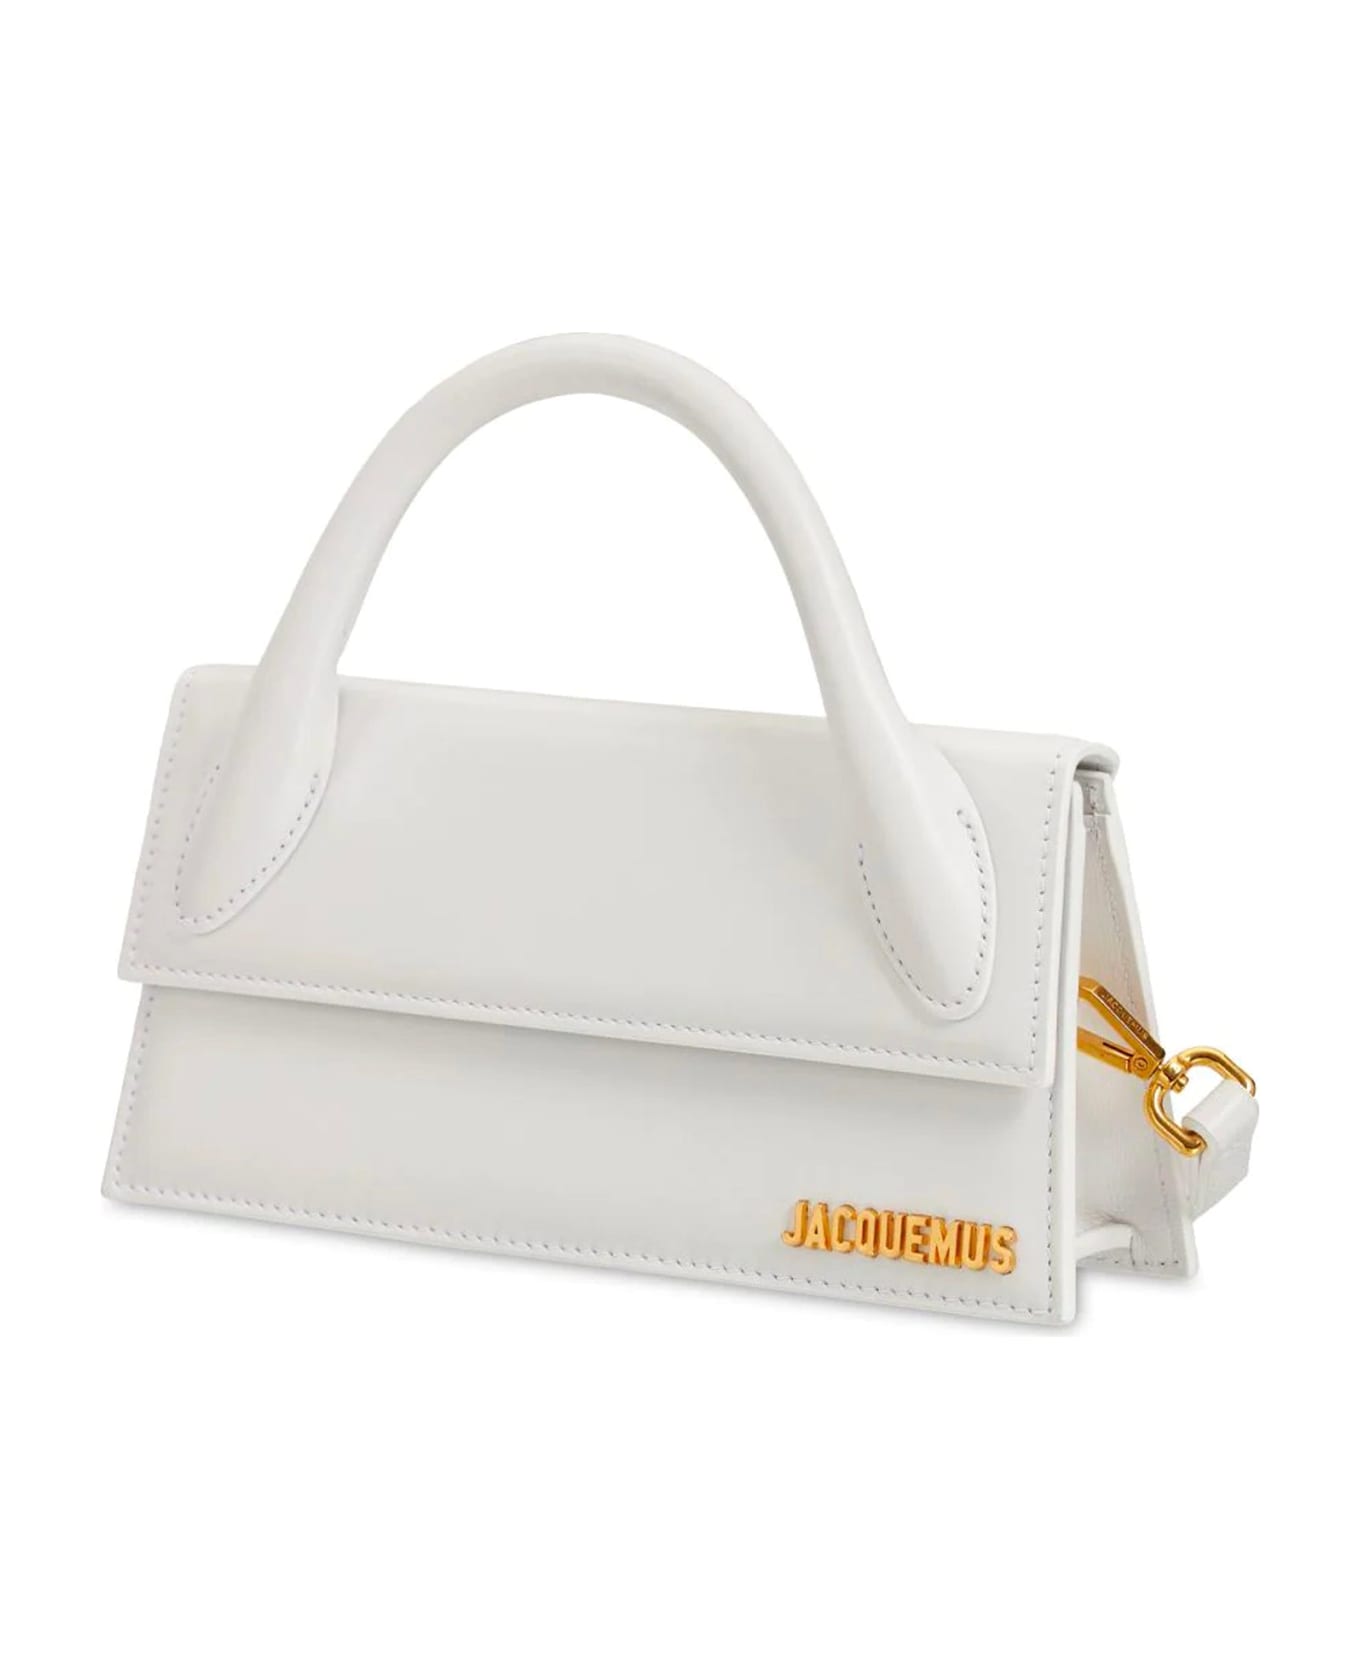 Jacquemus Le Chiquito Long Bag - White トートバッグ